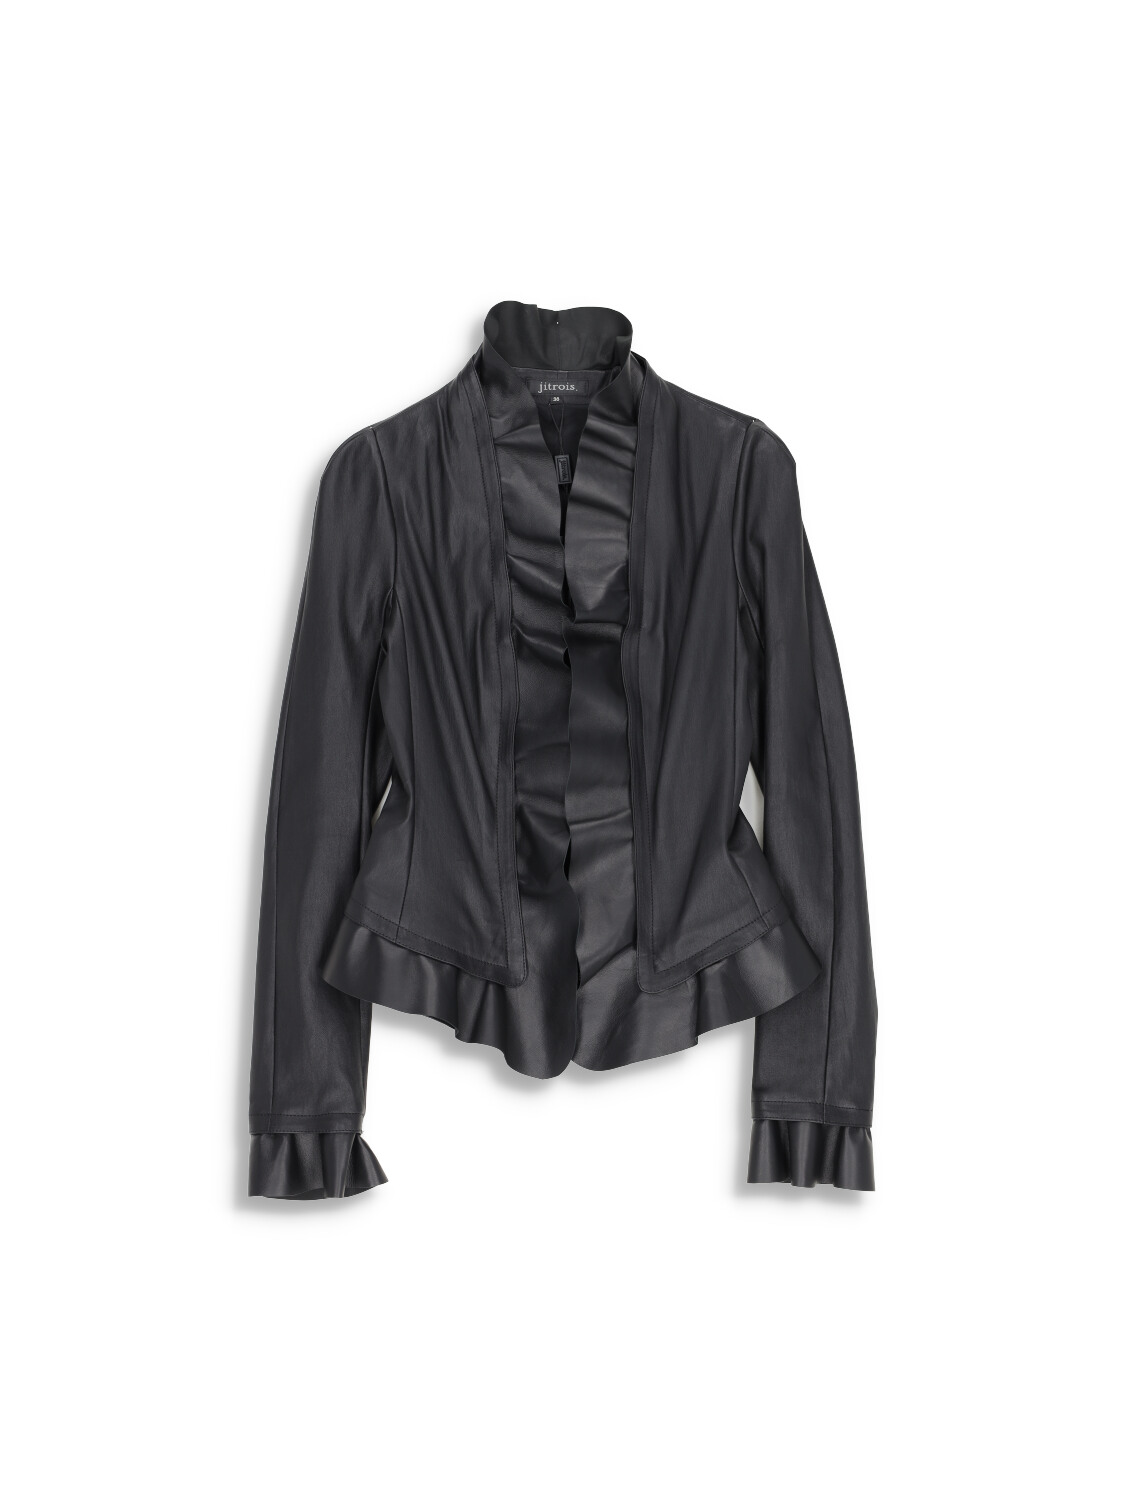 jitrois Blouson Jagger - jacket with ruffle details in lamb leather black 38